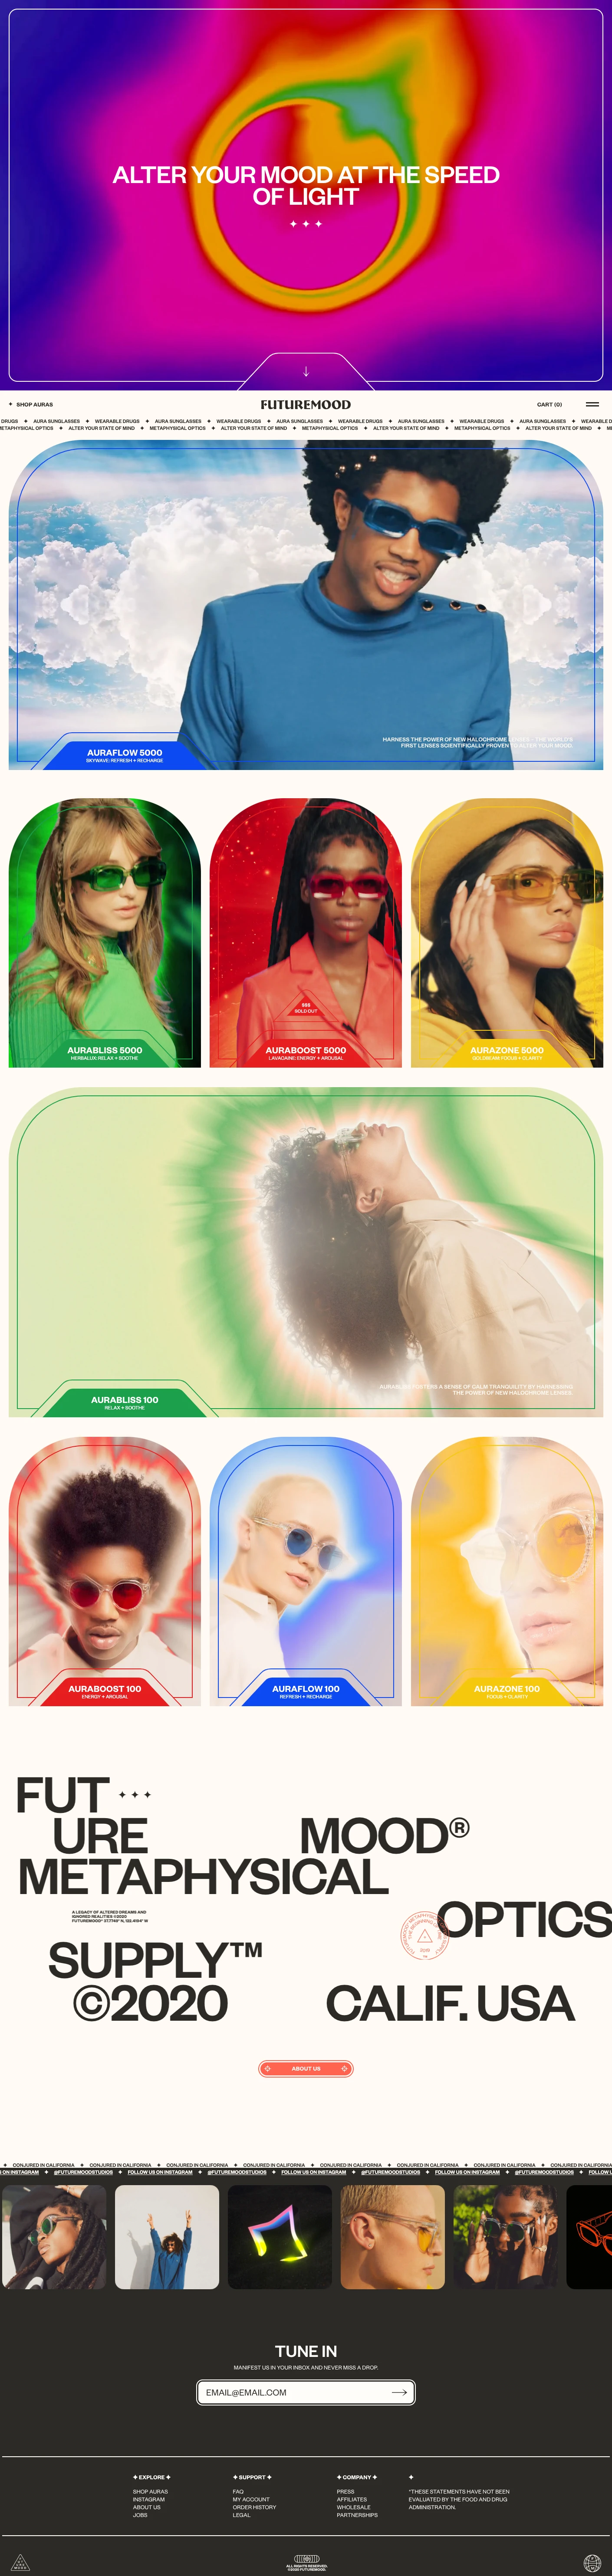 Futuremood Landing Page Example: Futuremood 'Auras' are the world's first sunglasses proven to alter your mood at the speed of light. Harness the power of new Halochrome Lenses that are scientifically tested and proven to alter your state of mind.